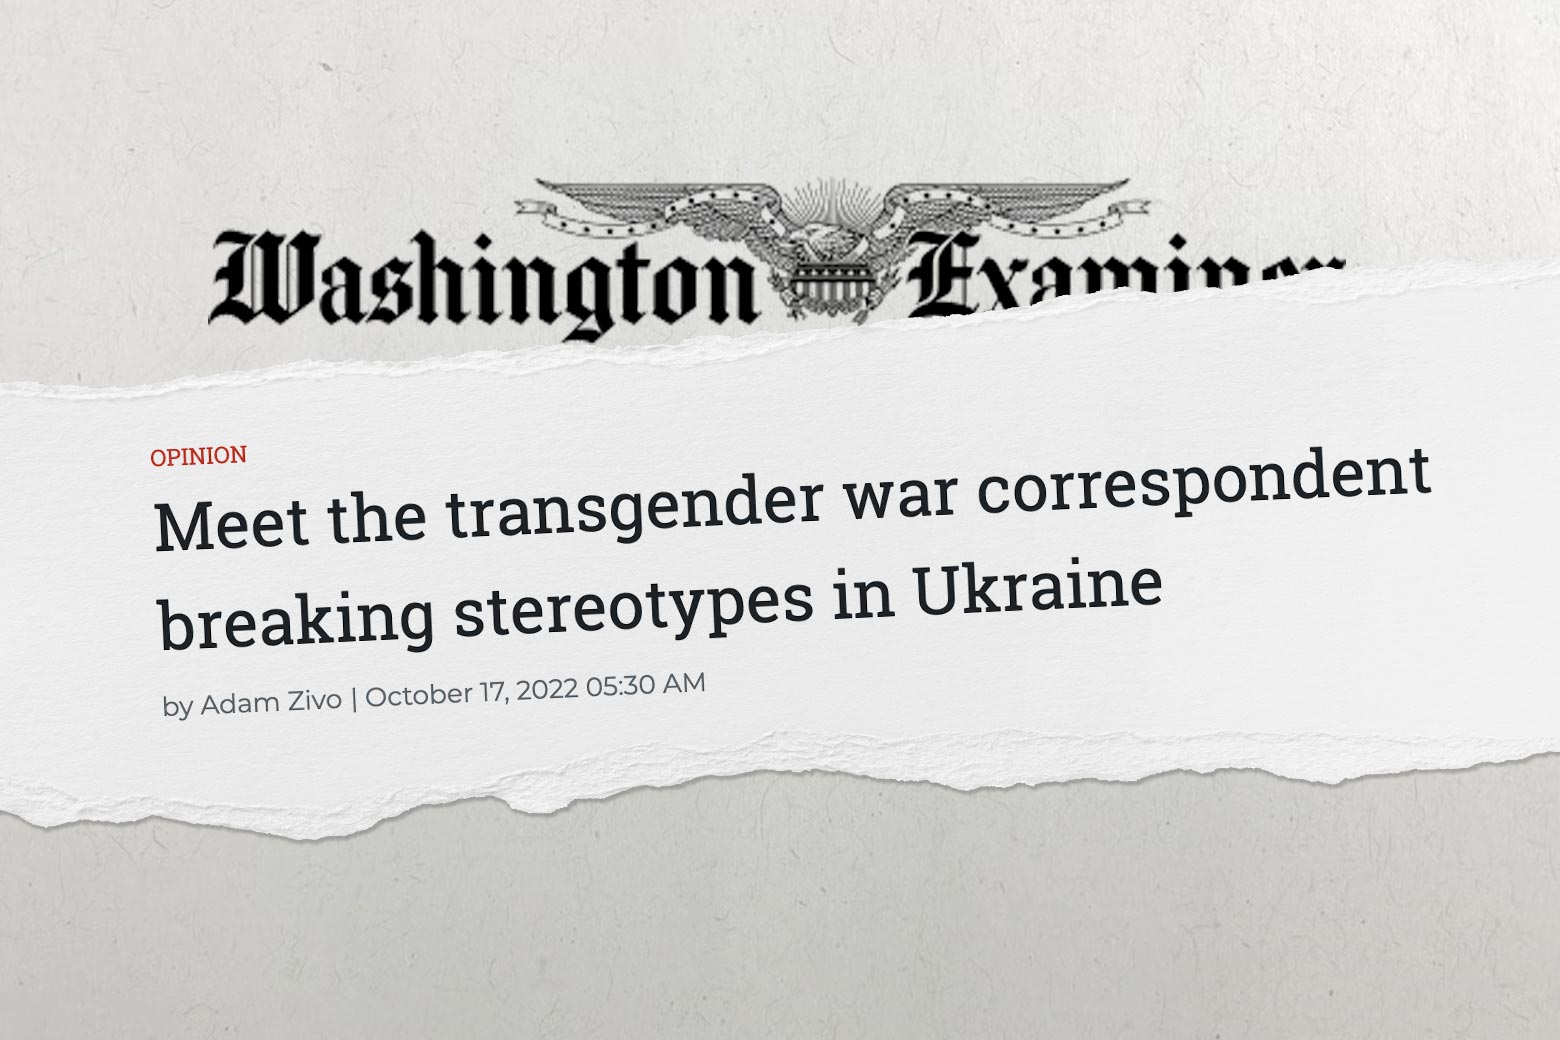 A cut-out of the Washington Examiner headline described in the piece, about the publication's logo.